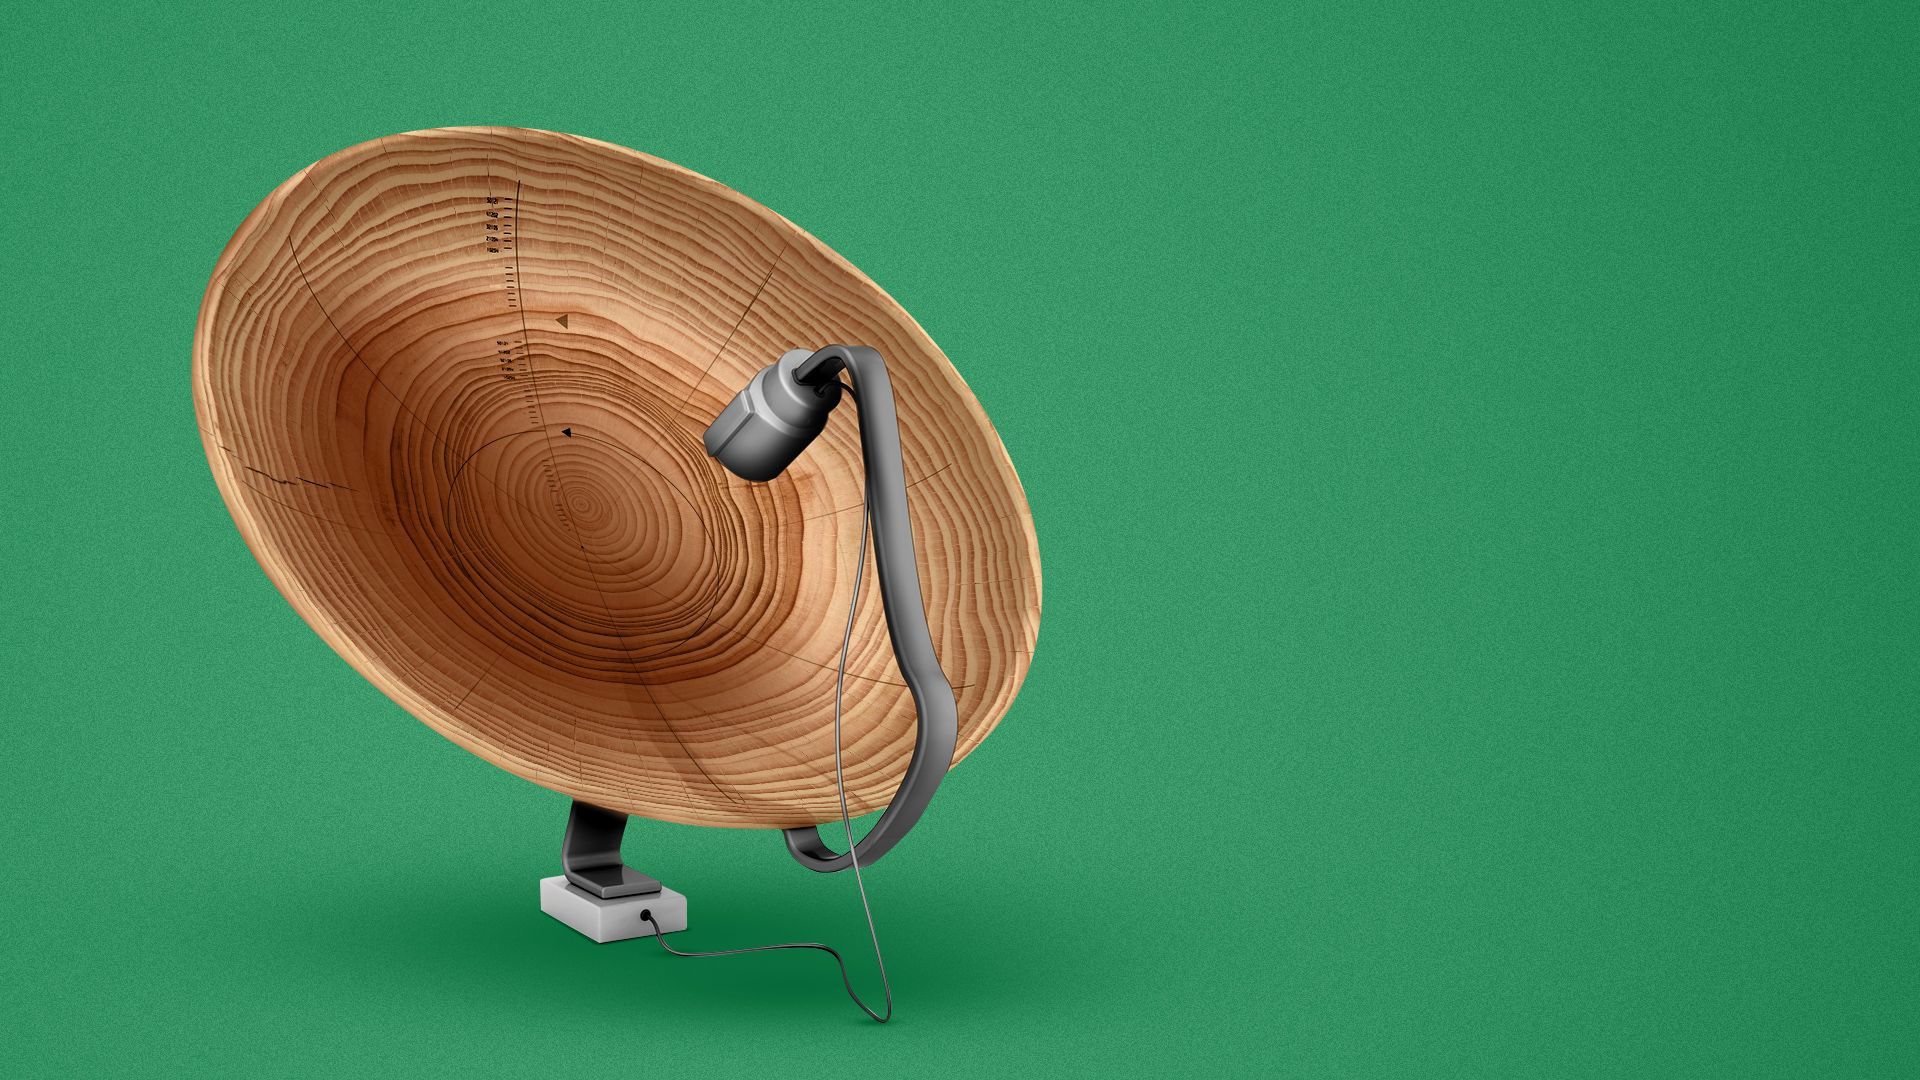 Illustration of a satellite dish with the dish section made out of a tree stump showing the tree's rings. 